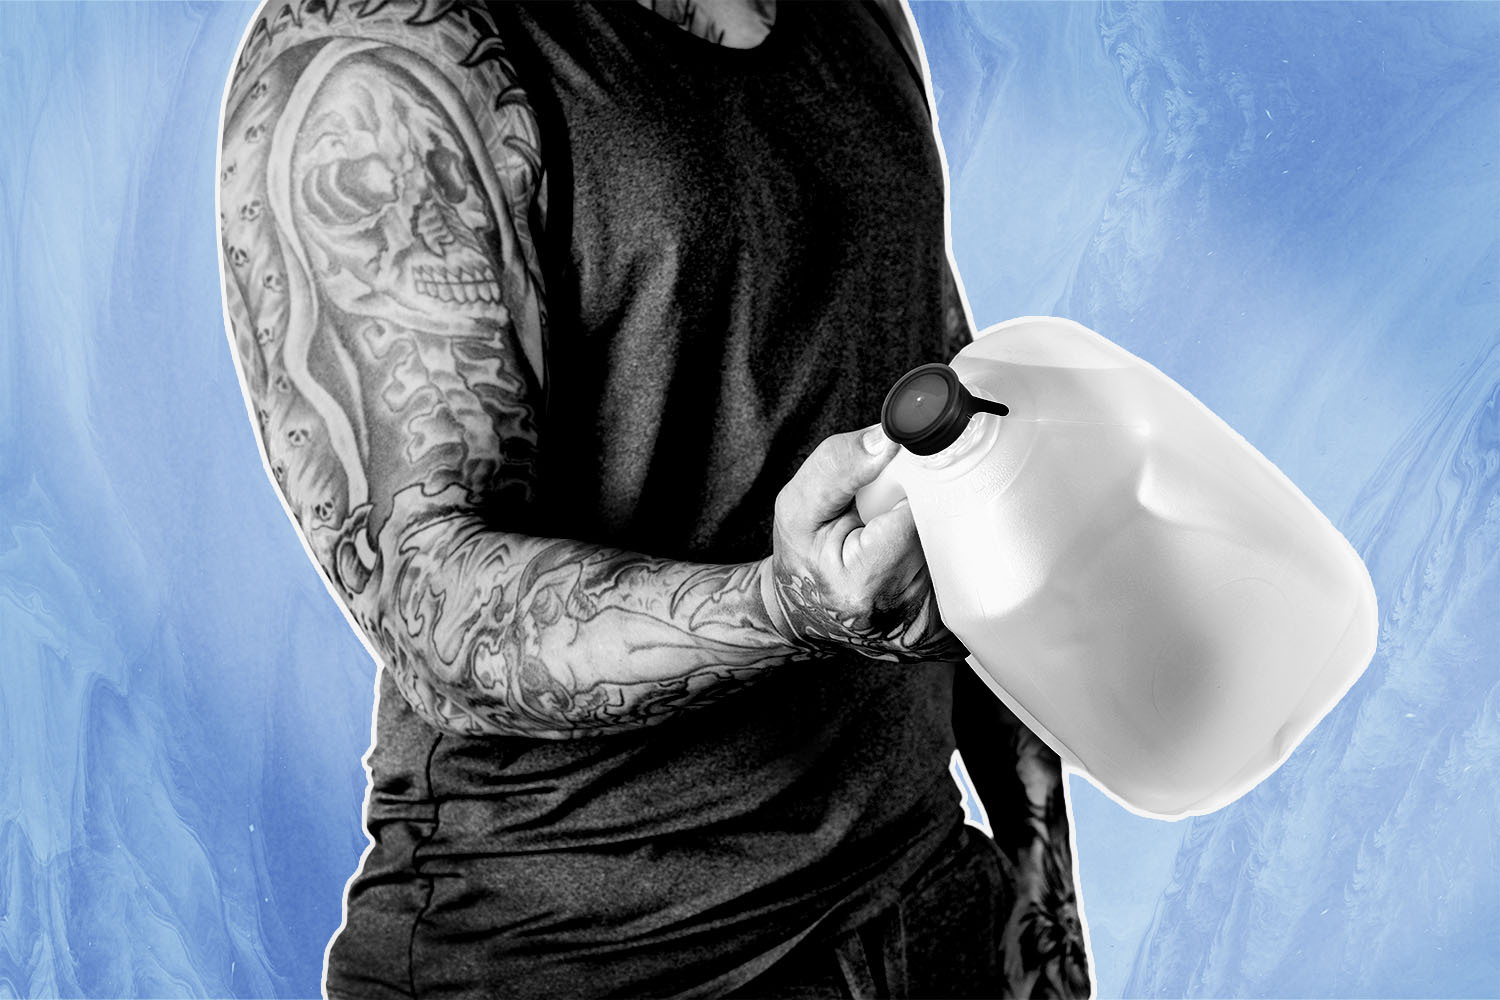 A man curling a water jug against a blue background.